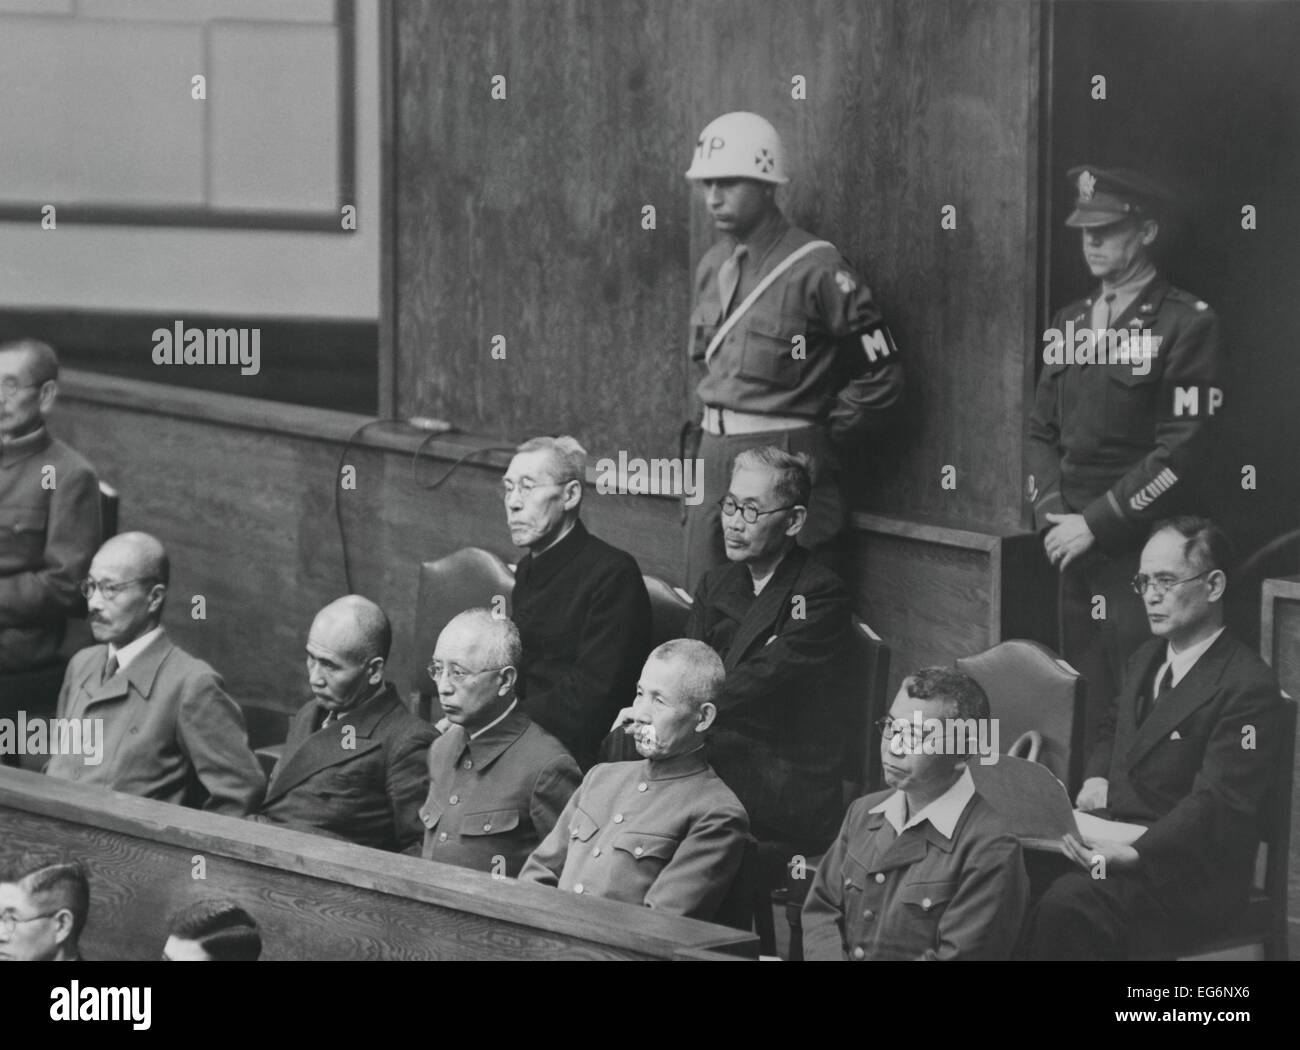 War crimes defendants in the dock at the Tokyo War Crimes Tribunal, May 21, 1946. Front row, at far left is Prime Minister and Stock Photo